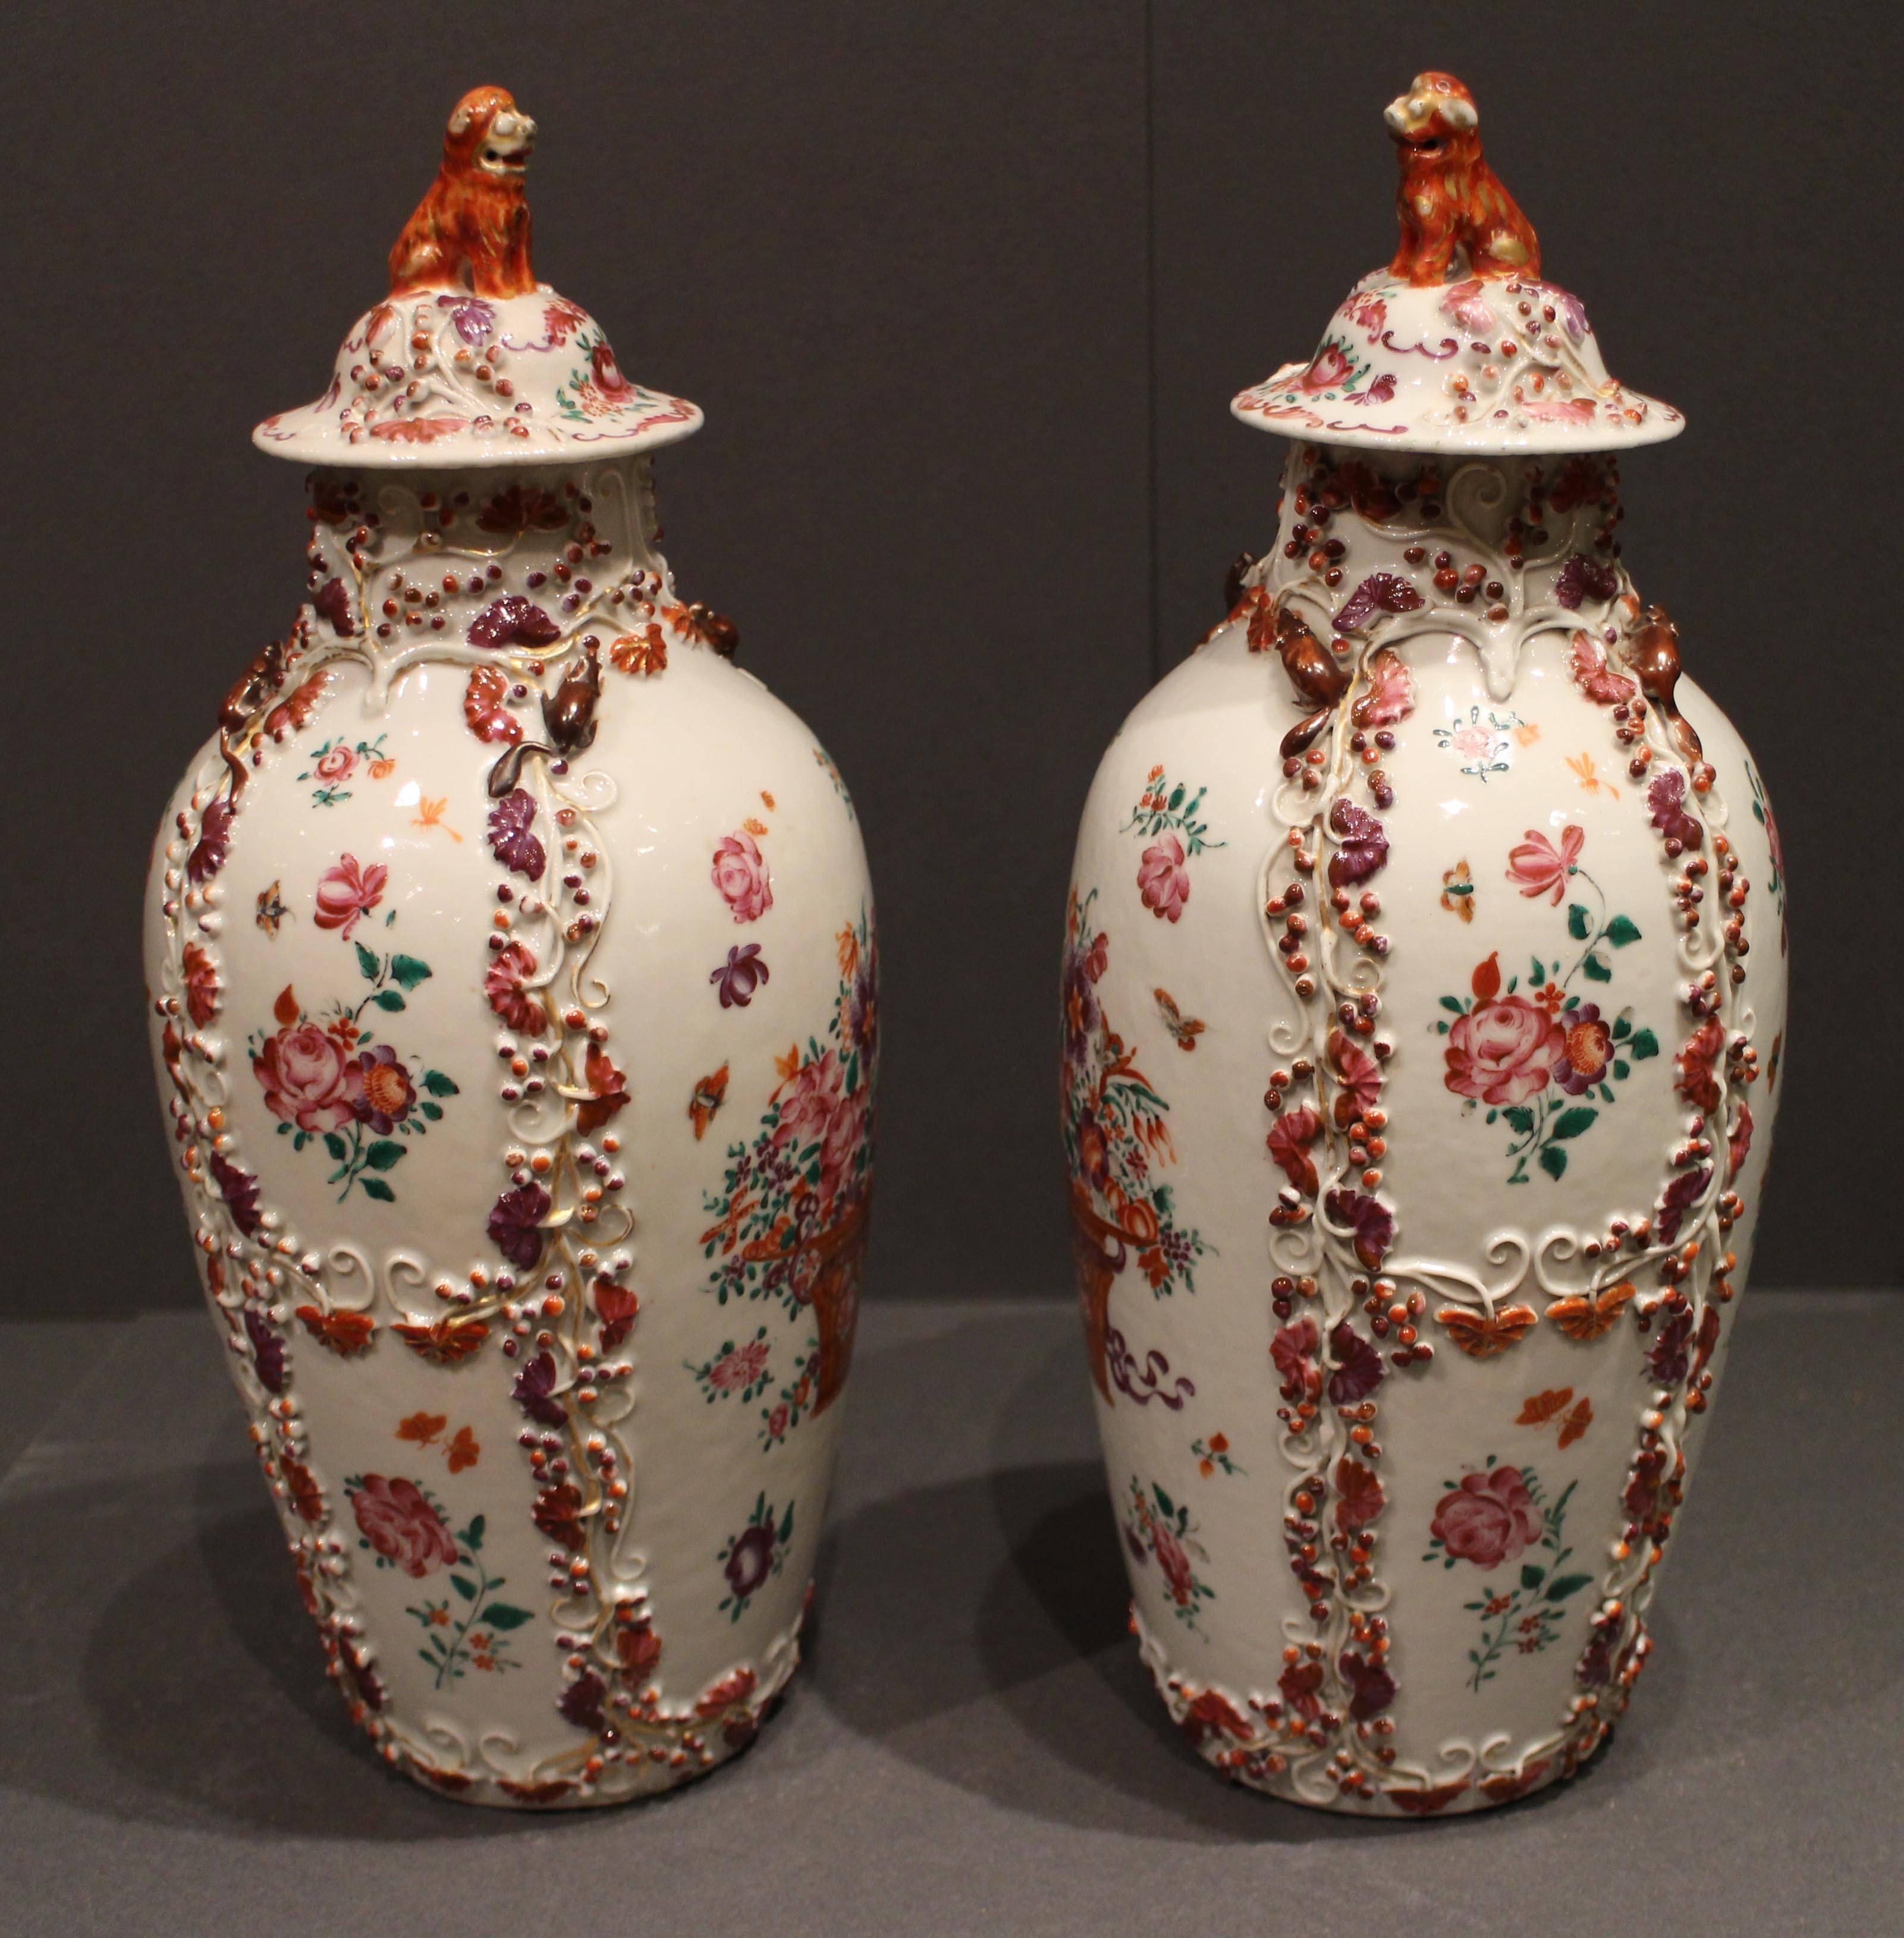 A pair of antique Chinese famille rose vases, decorated with floral displays in pinks, purples and oranges and applied three-dimensional flowers and squirrels, the lids topped with orange foo dogs.